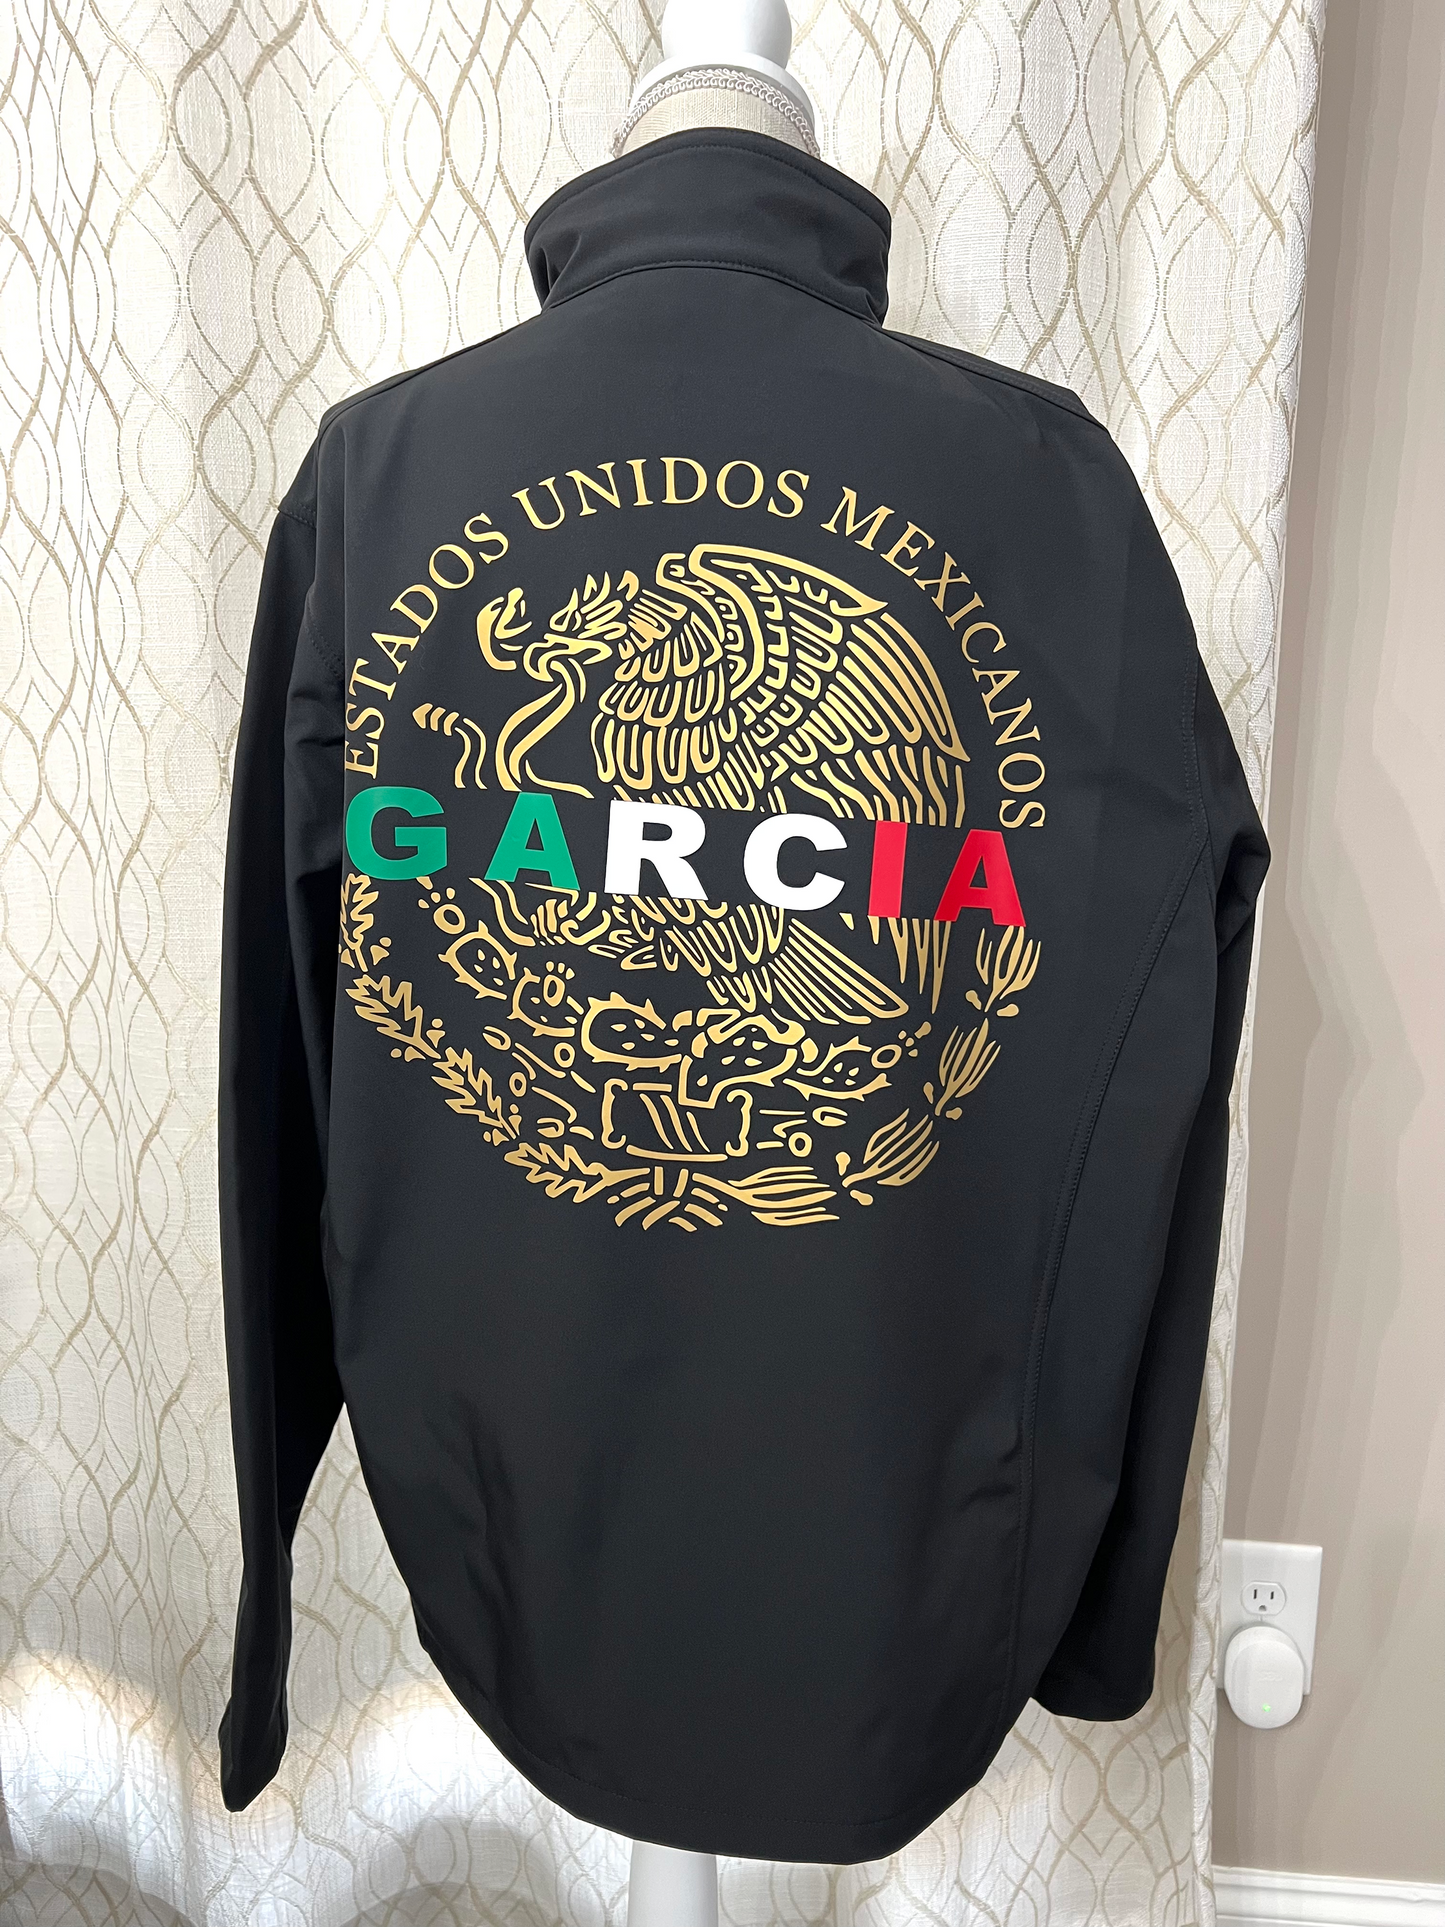 chamarra personalizada, chamarra con escudo de mexico ,Mexican State Jacket, Soft Shell Jacket, Personalized Ariat Style Jacket